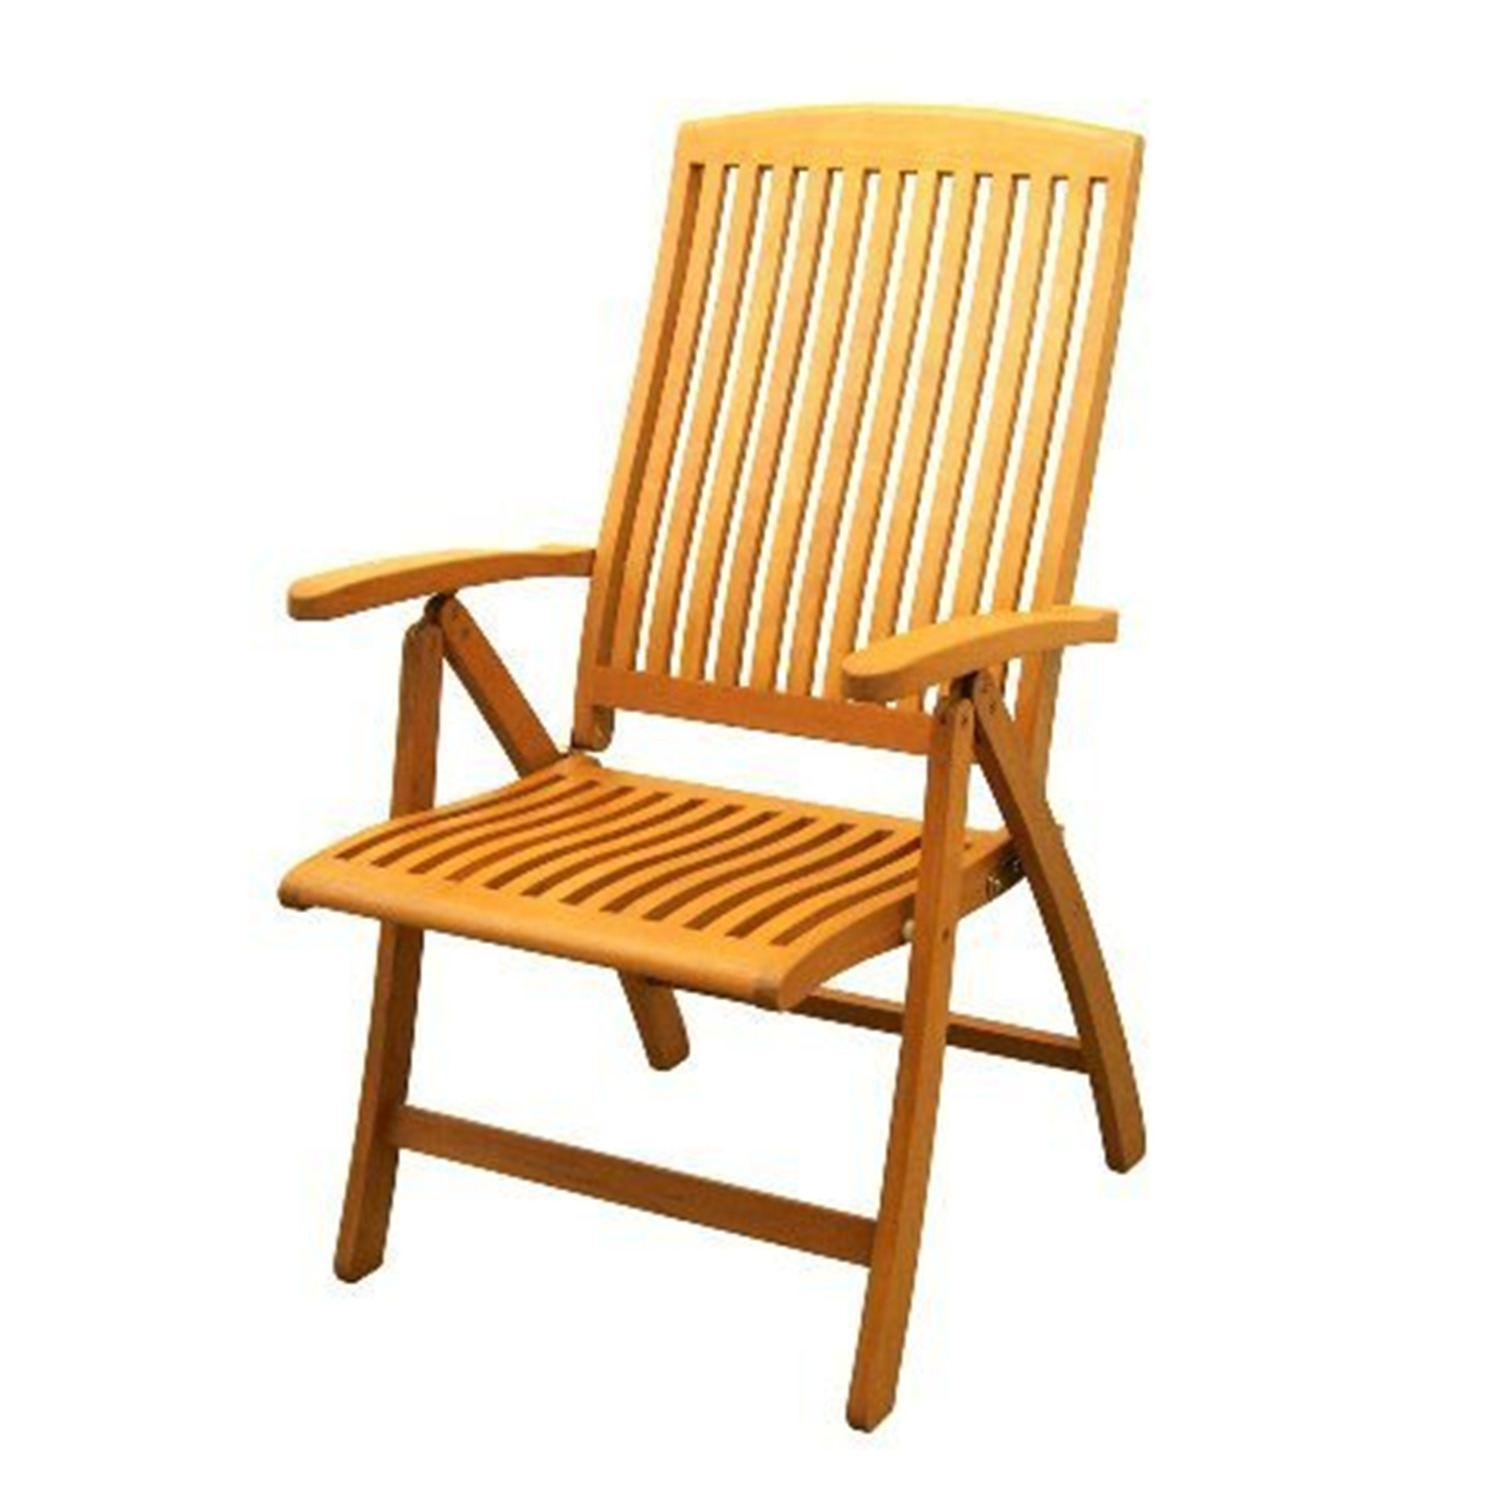 Royal Tahiti Outdoor Set of Two 5-Position Folding Arm Chair - image 1 of 2